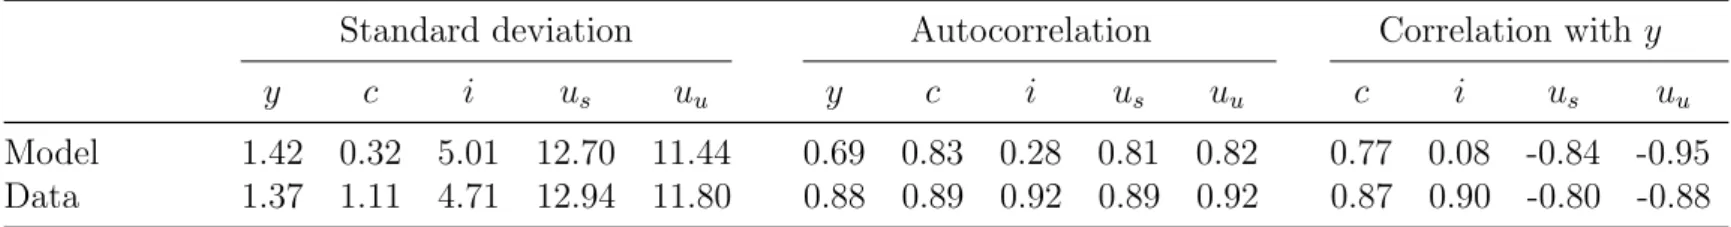 Table 2.4: Standard deviations, autocorrelations and cross correlations with output, from model simulations and U.S